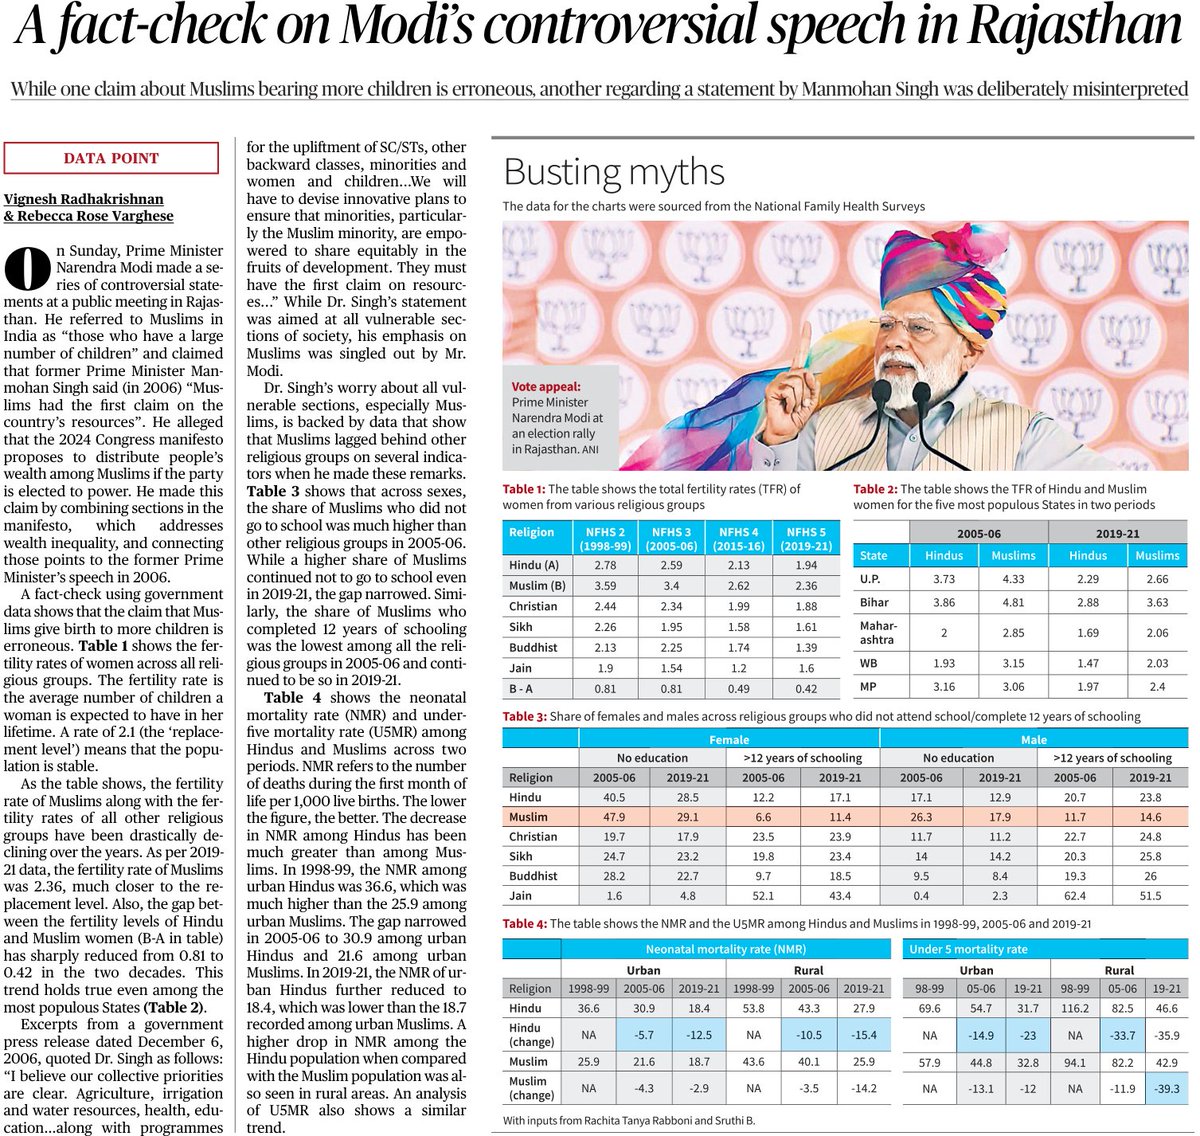 Are Muslims bearing more children? Or are fertility rates actually declining? A fact-check on Modi's controversial speech in Rajasthan, from @VigneshJourno and @RebeccaRoseVar1